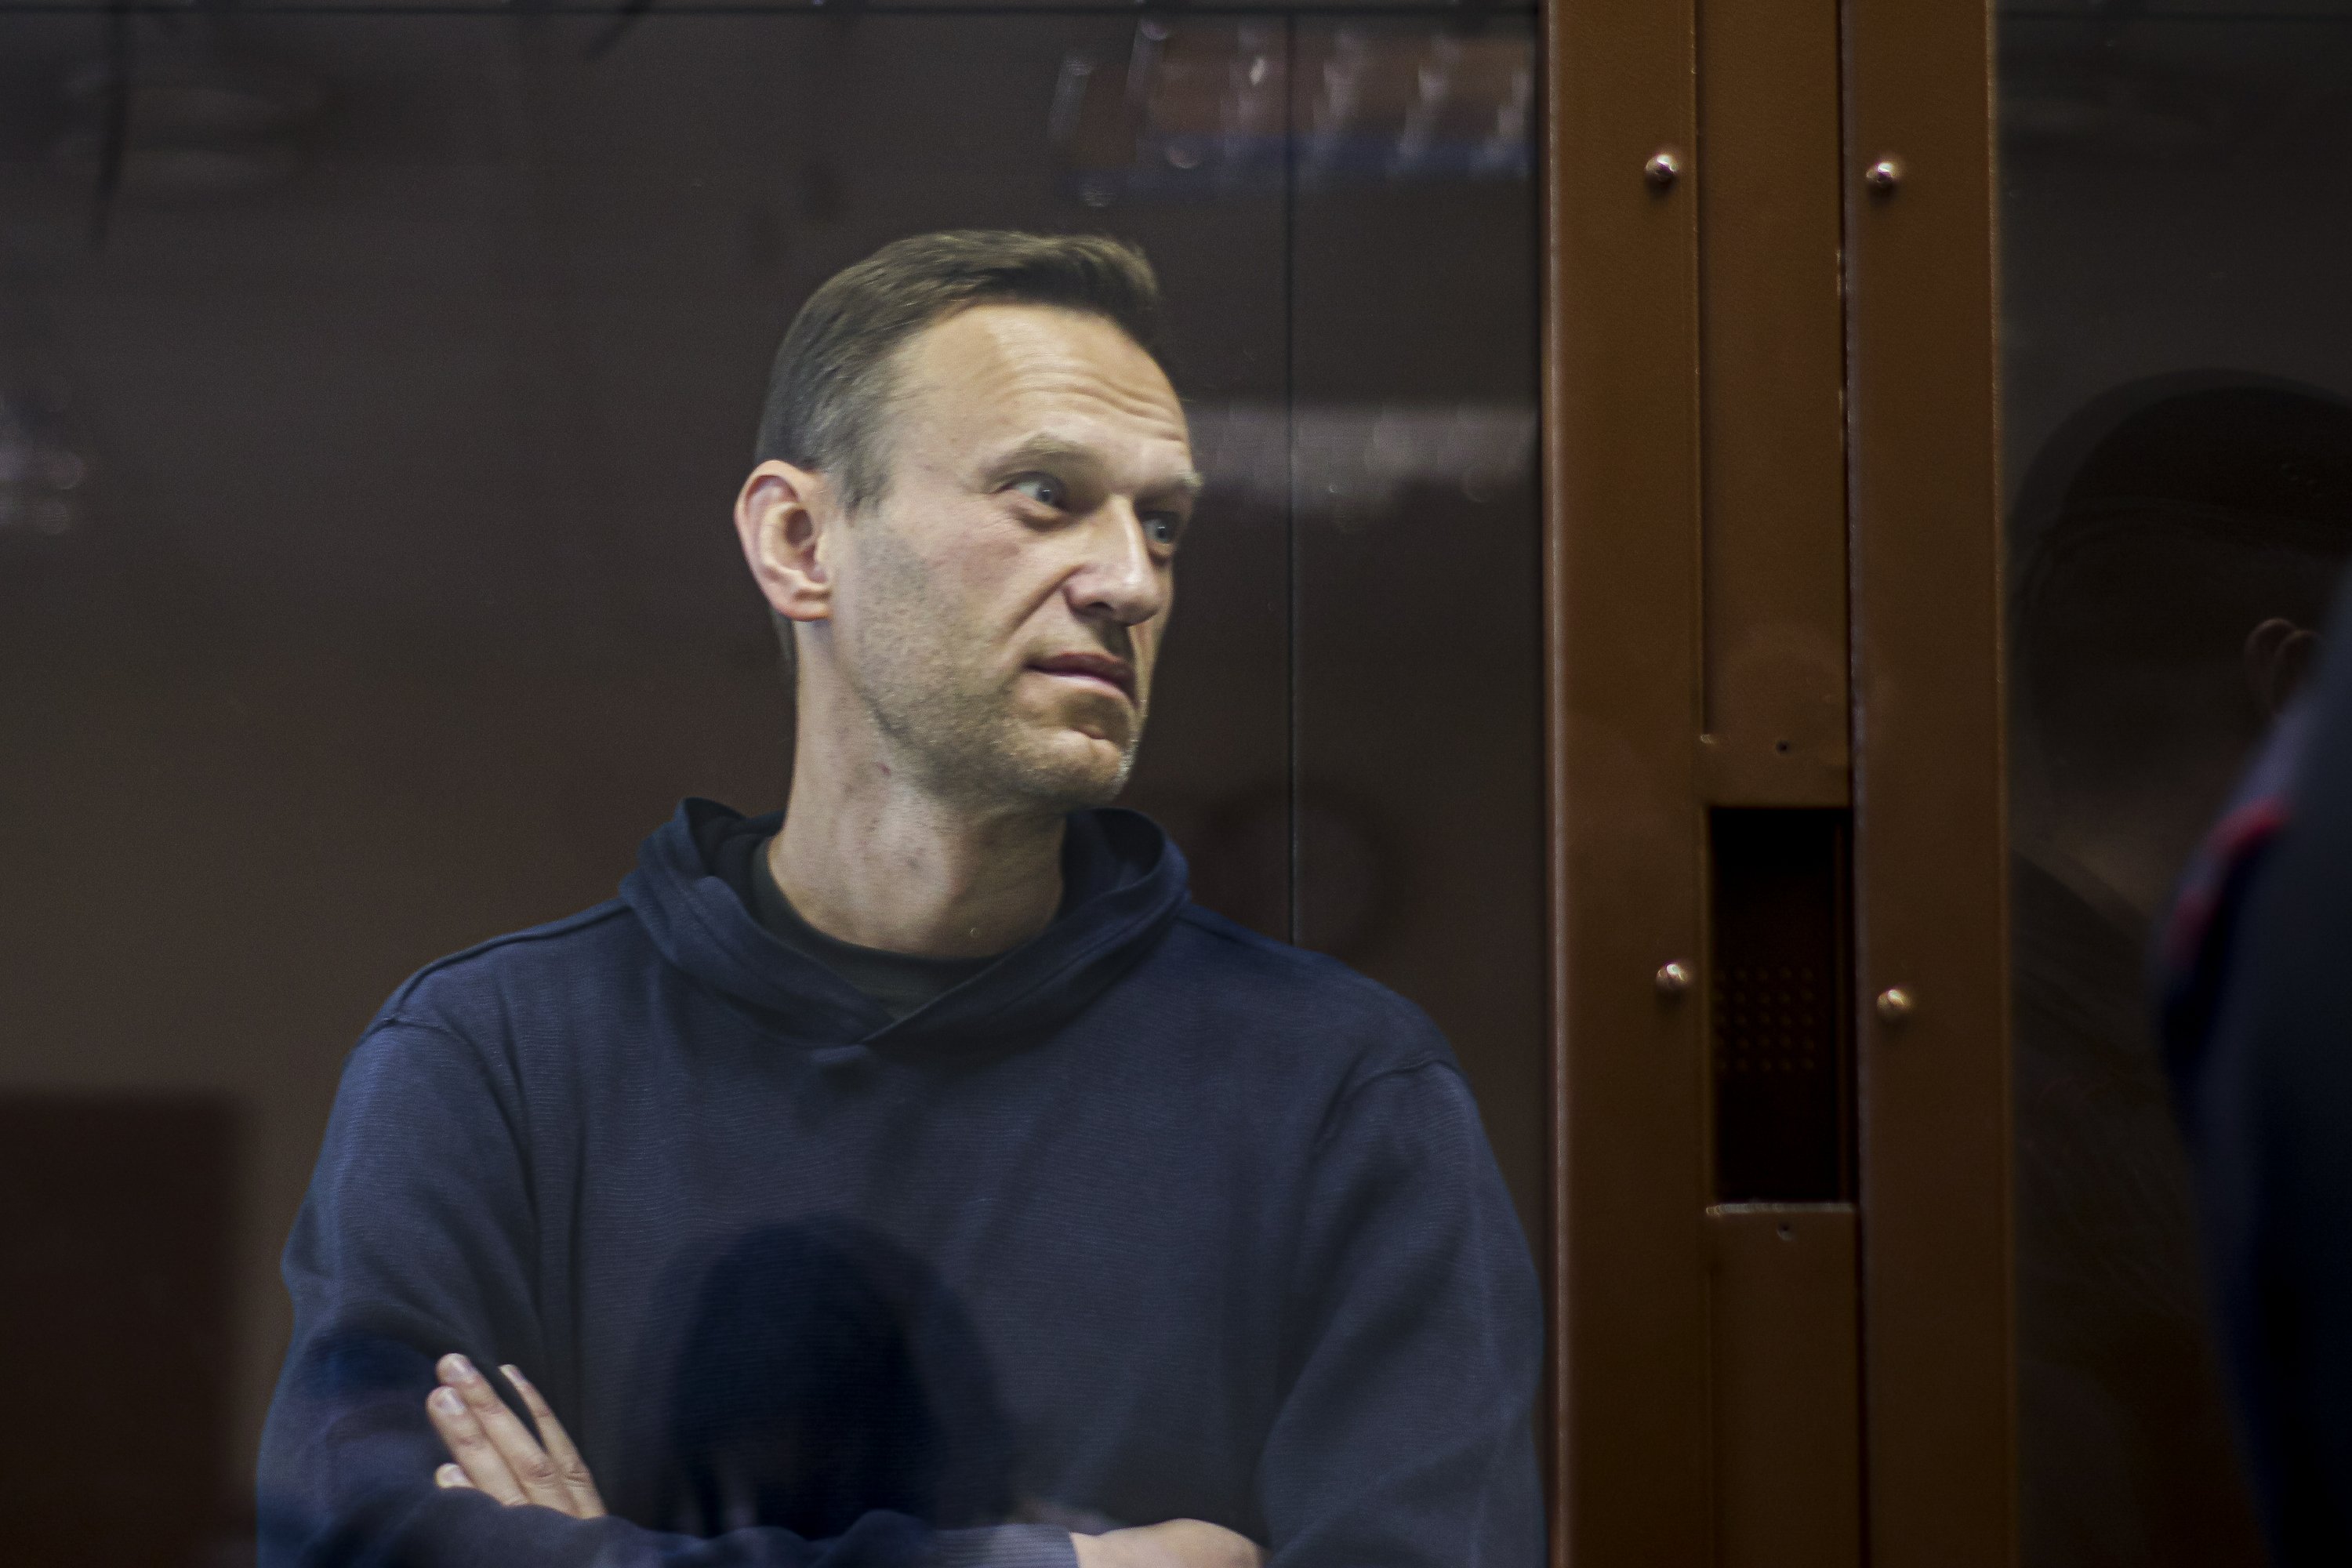 In a new tactic, Navalny’s supporters gather in courtyards